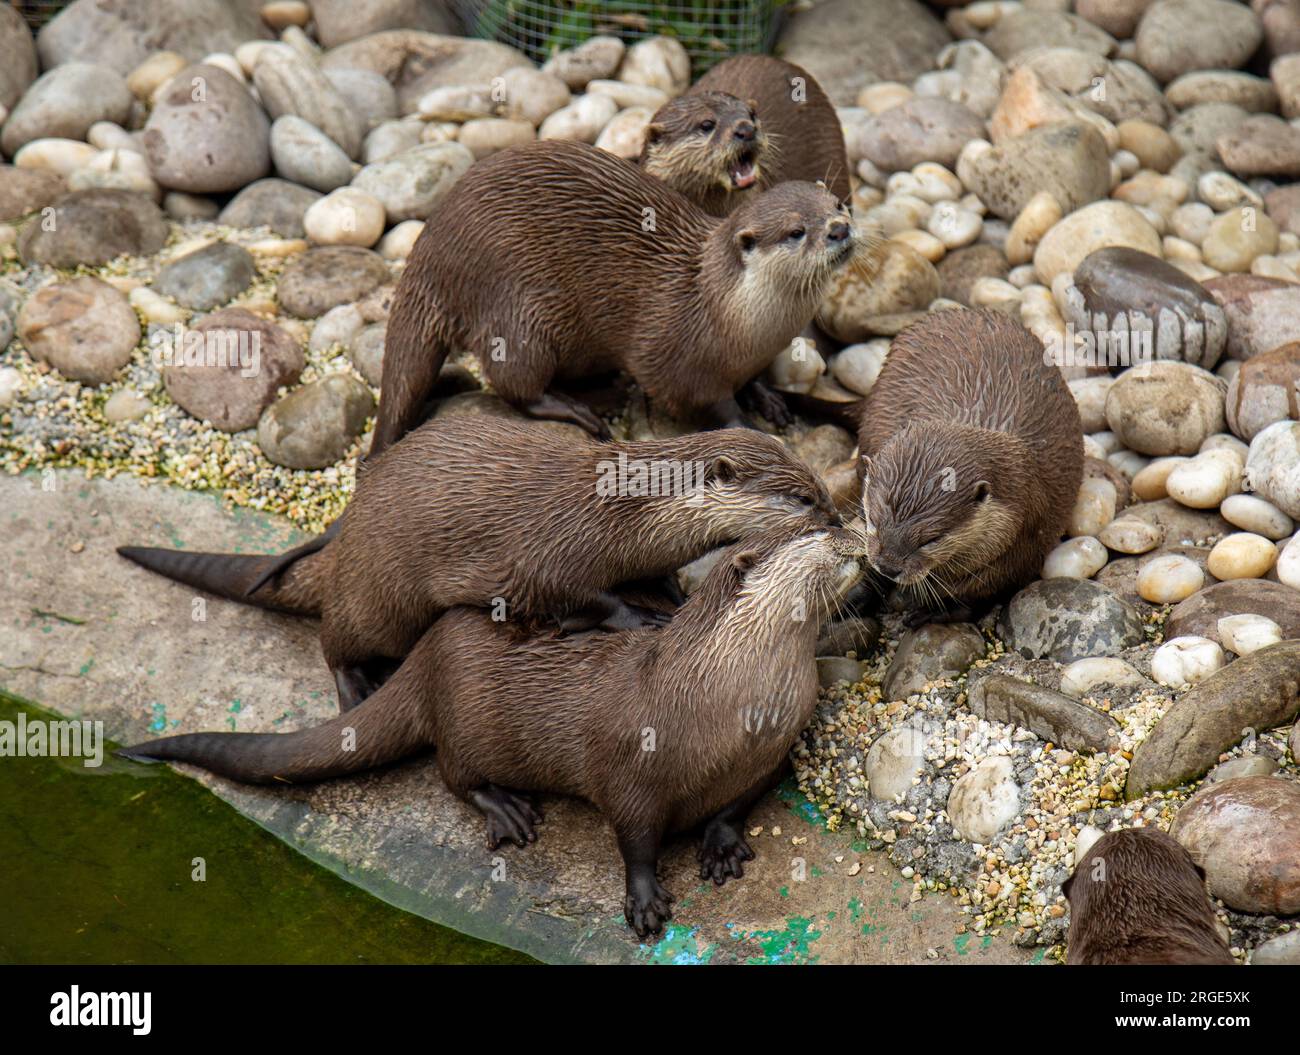 Family of short clawed otters all playing together on stones at the side of a pond Stock Photo